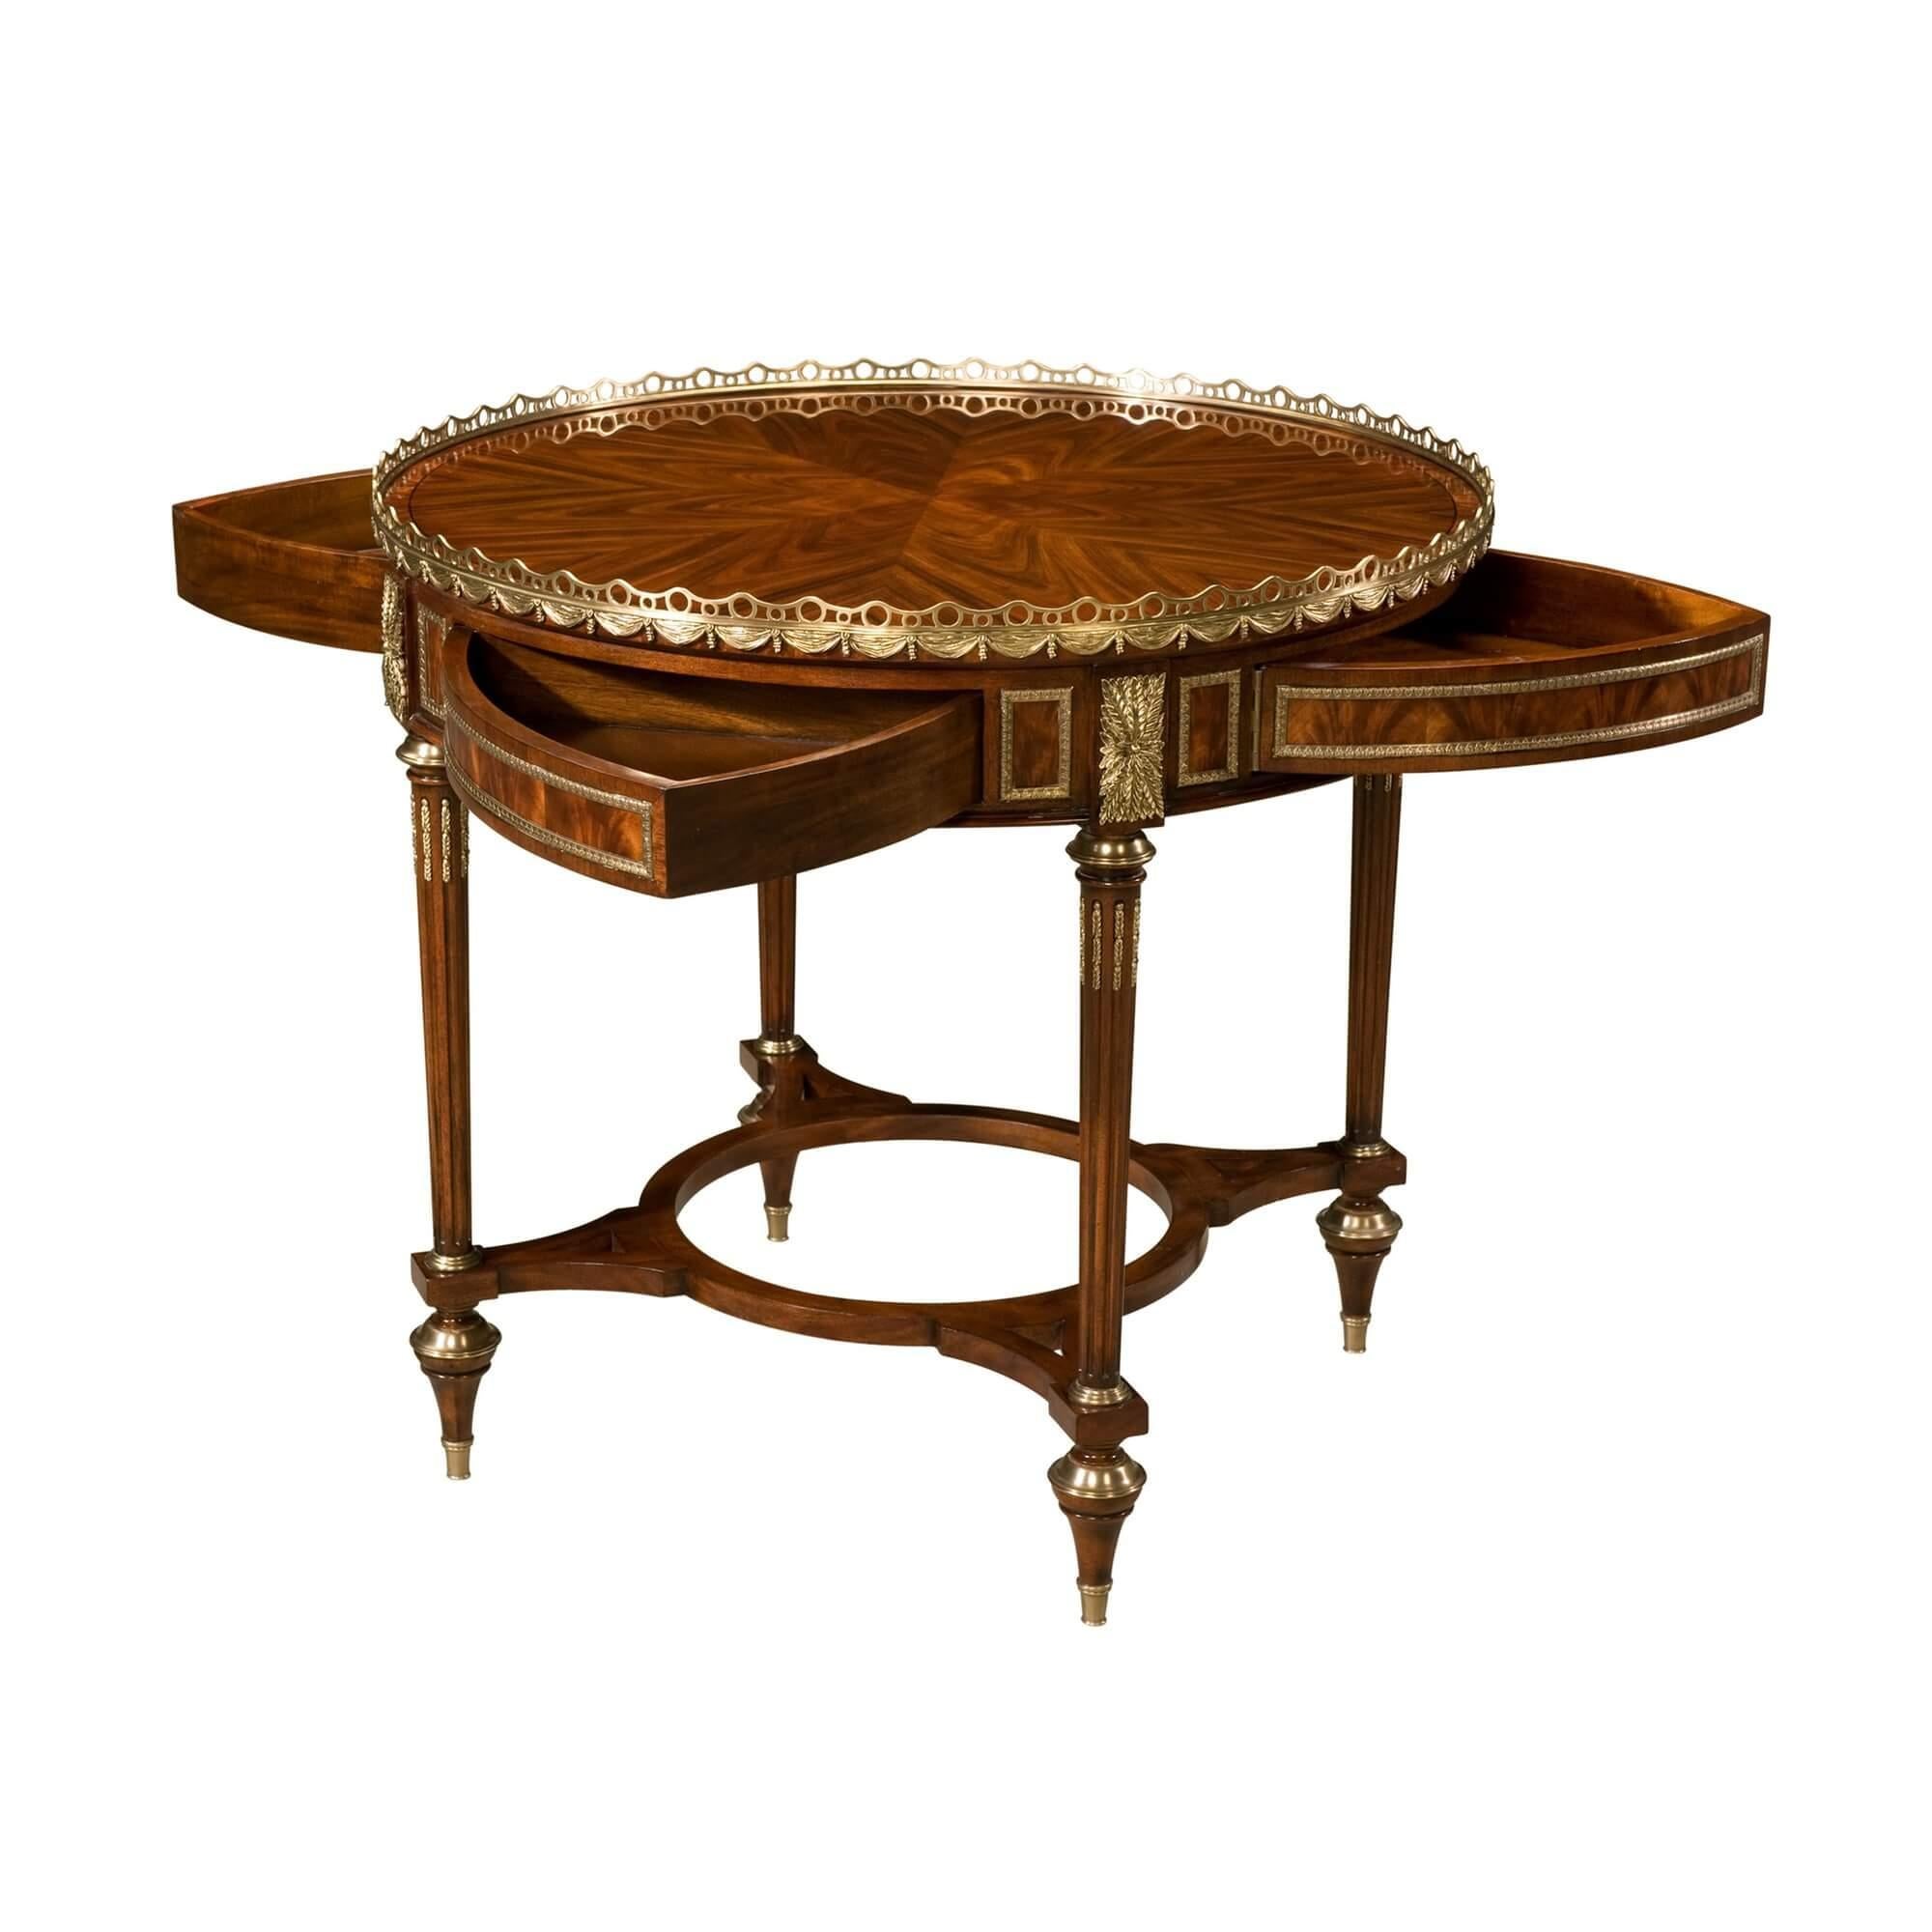 A solid mahogany, rosewood crown and flame mahogany veneered mechanical center table, the circular top with a finely cast brass gallery of repeating swags, above a brass molding paneled frieze with four frieze swing drawers opening by the turning of